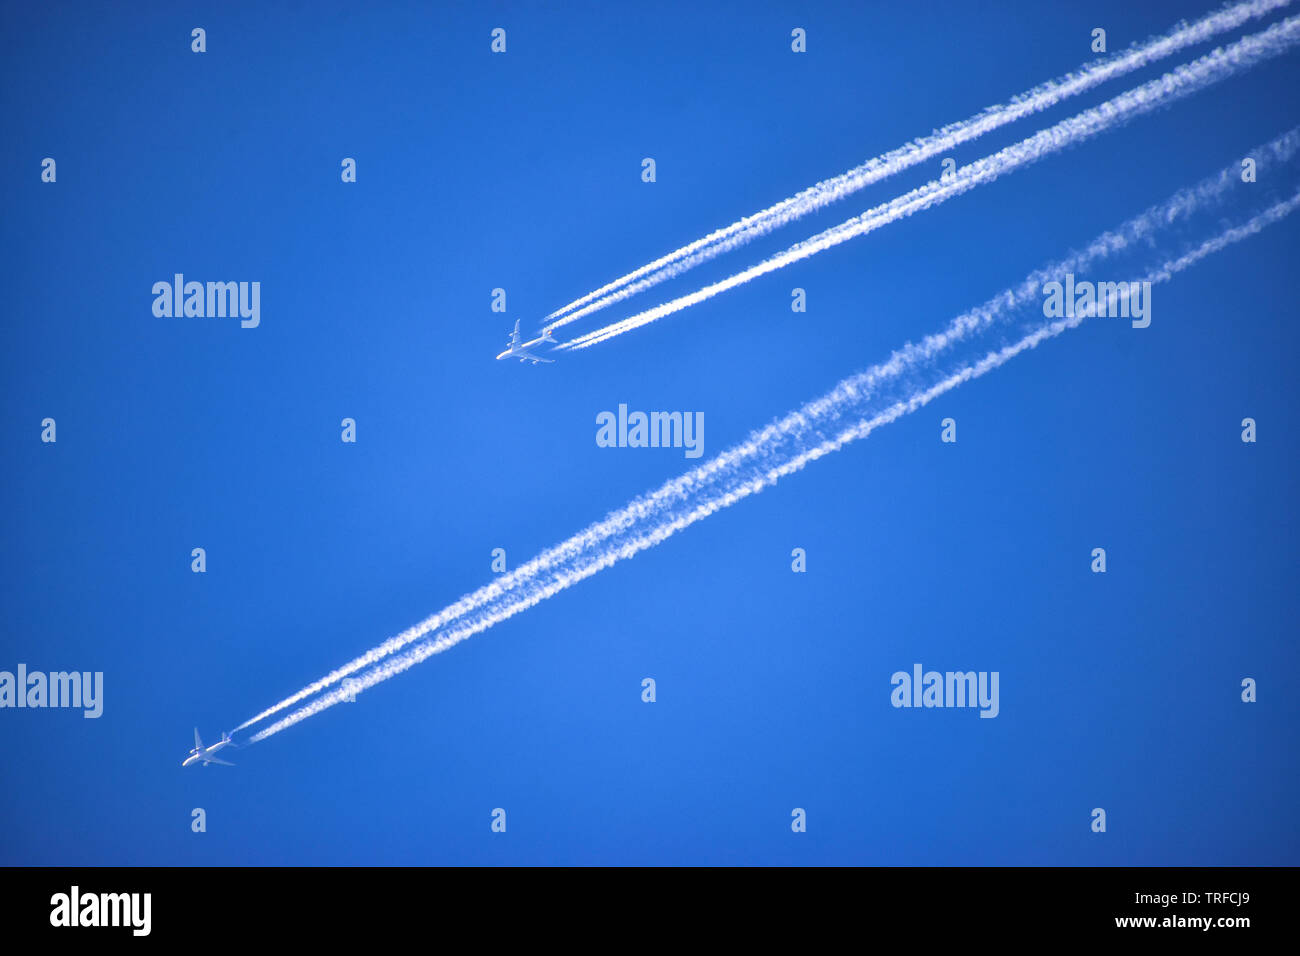 Contrails, Condensation Trails, two planes, aircraft, dogfight, on collision course Stock Photo